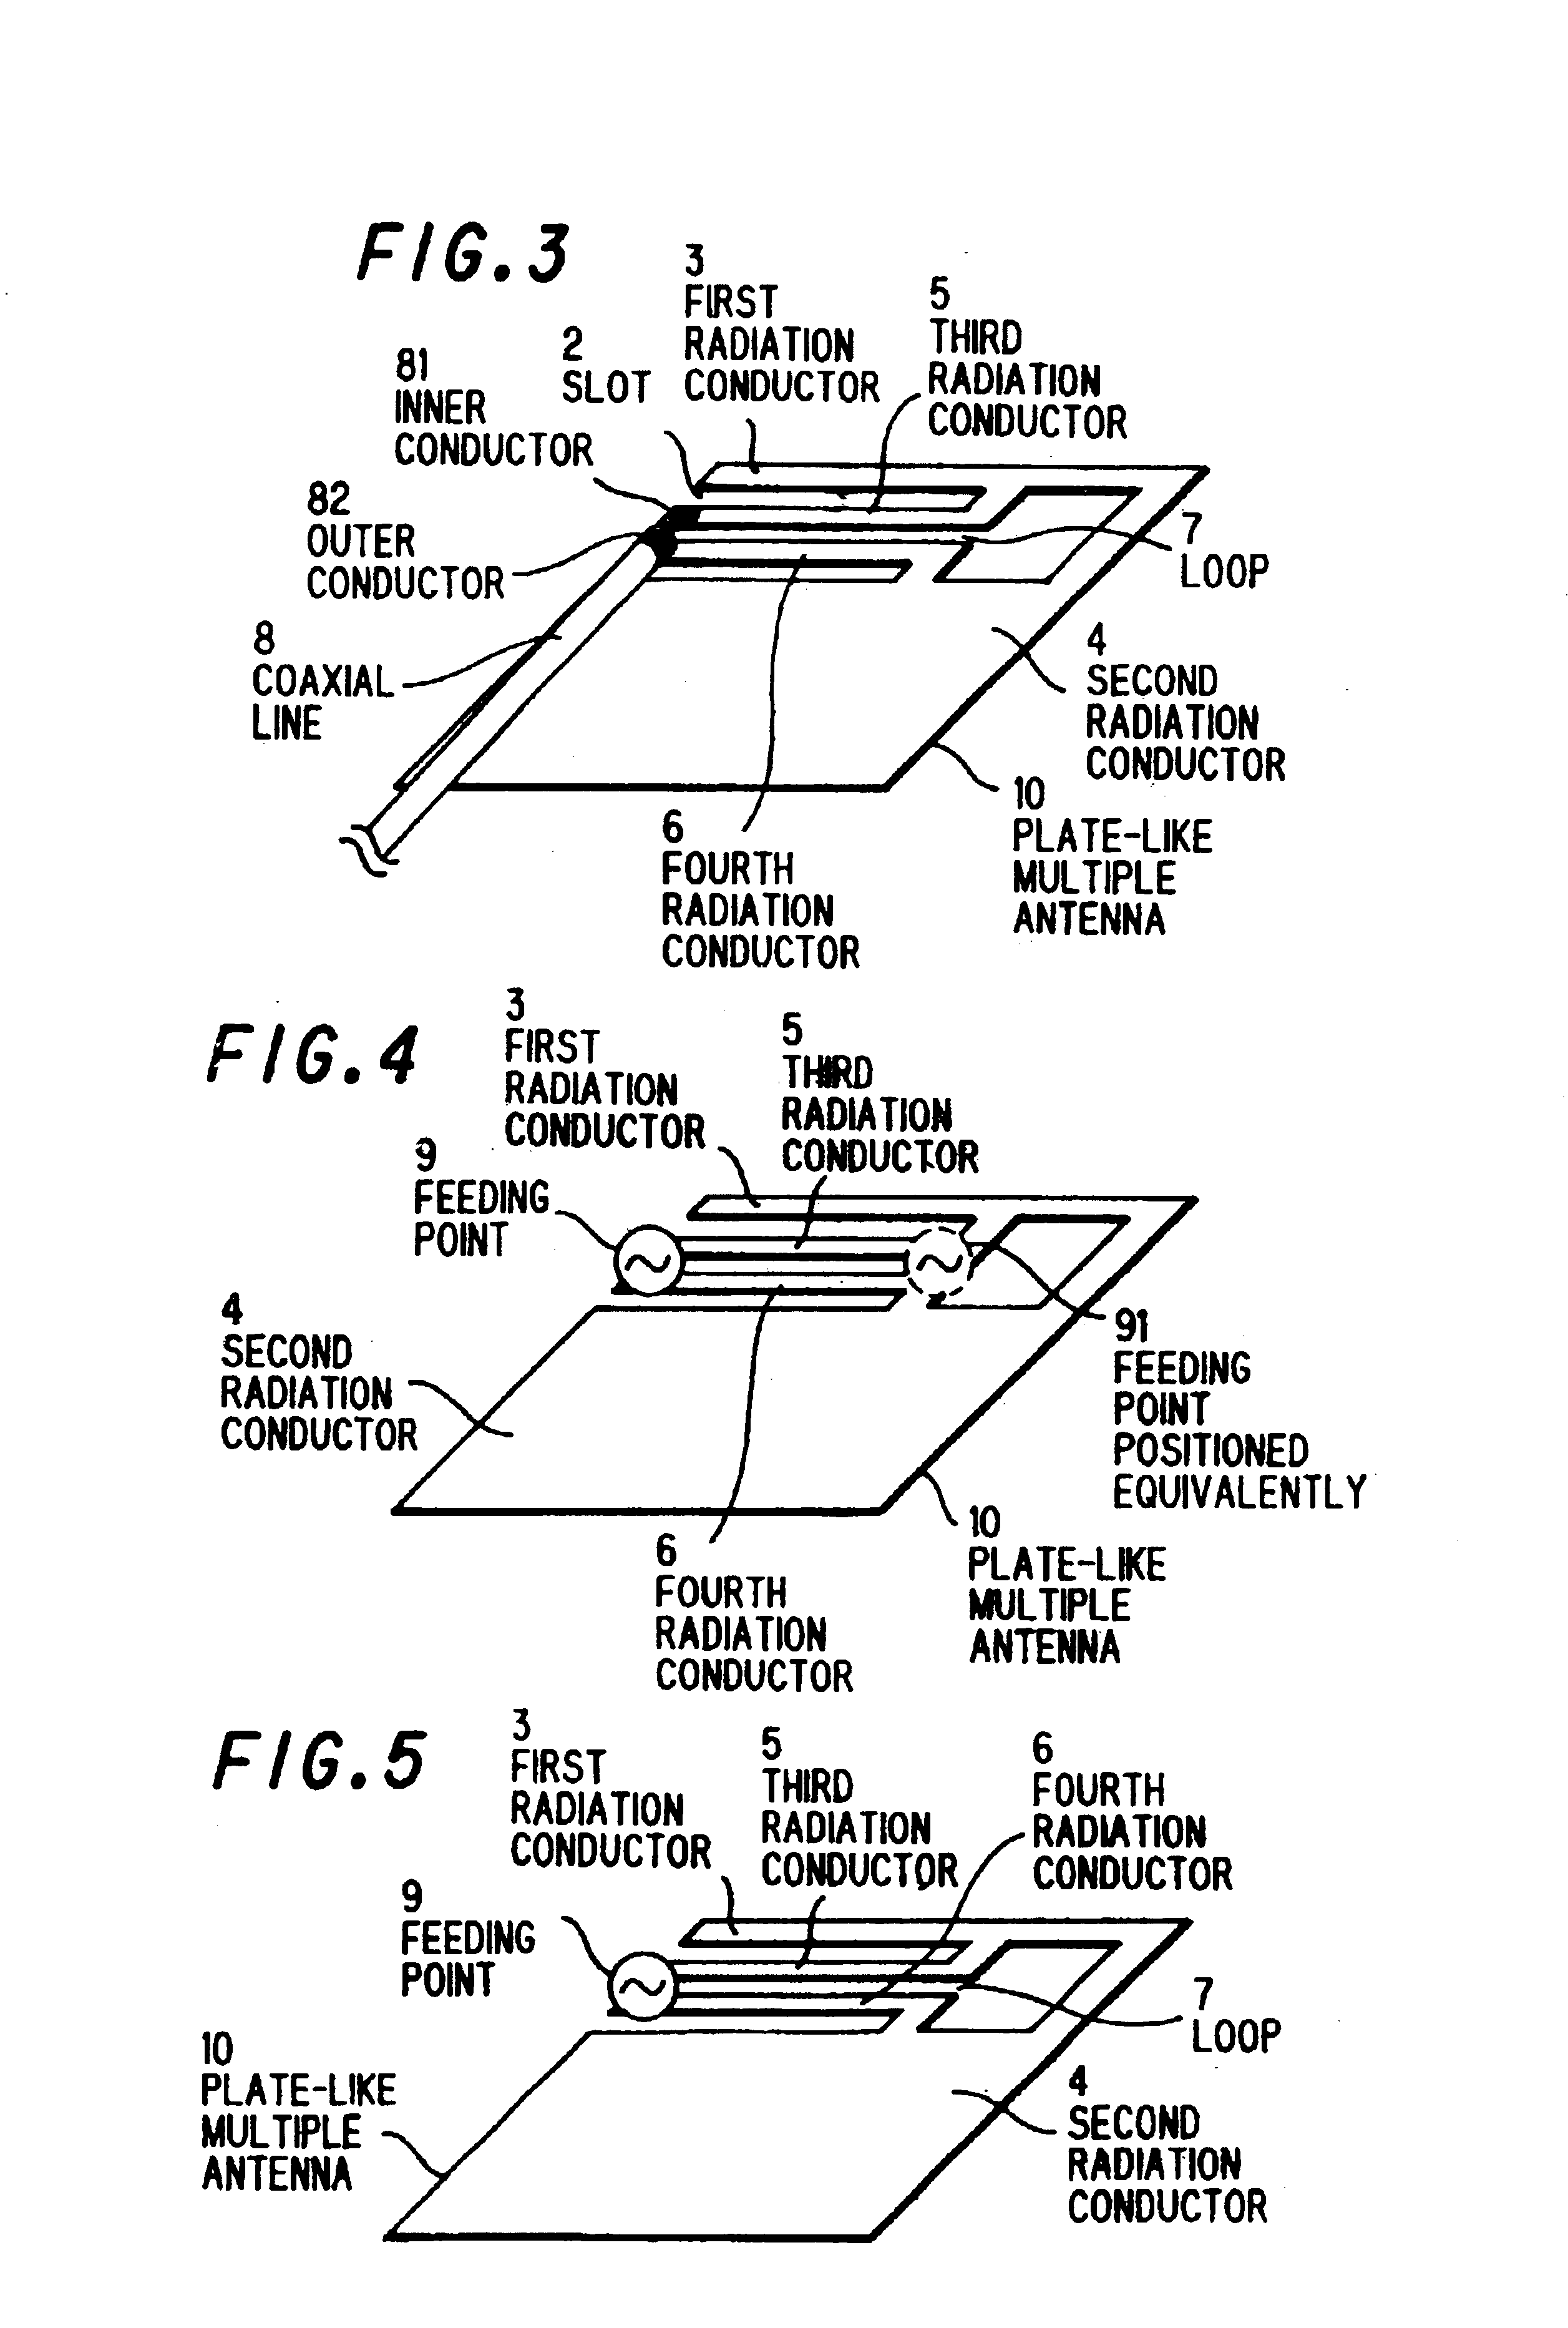 Plate-like multiple antenna and electrical equipment provided therewith